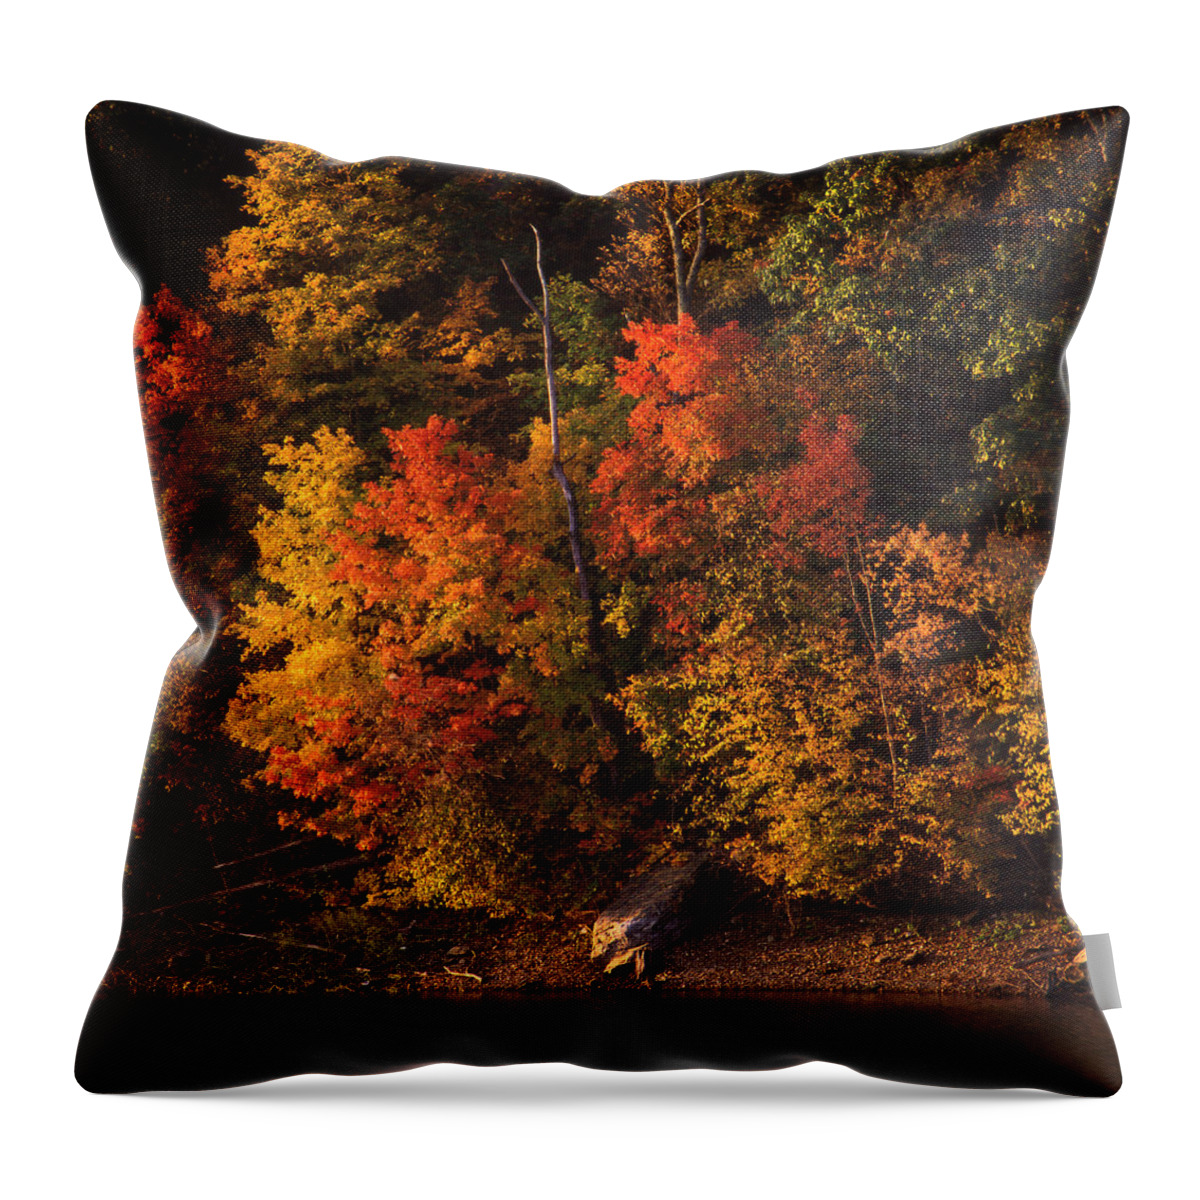 Fall Foliage Throw Pillow featuring the photograph Autumn in the Ozarks by Greg Kopriva